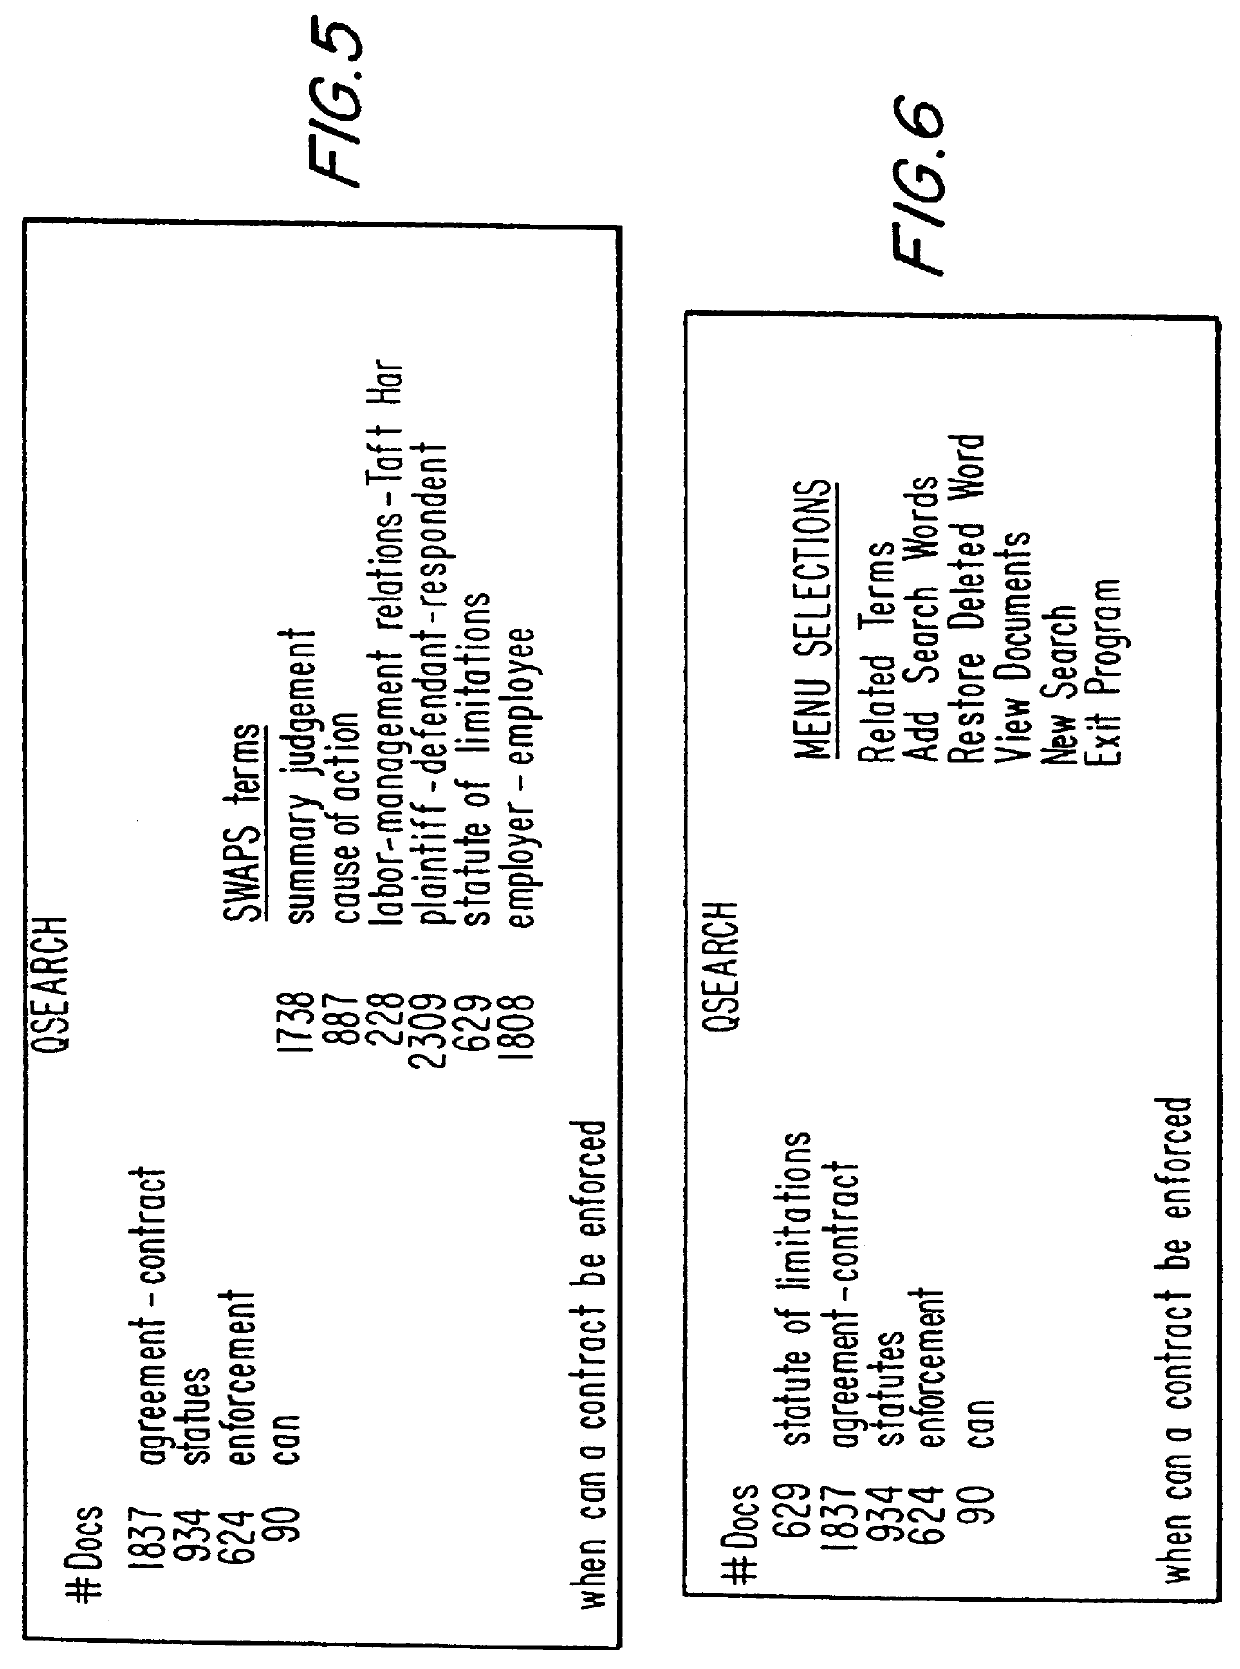 Method of indexing and retrieval of electronically-stored documents